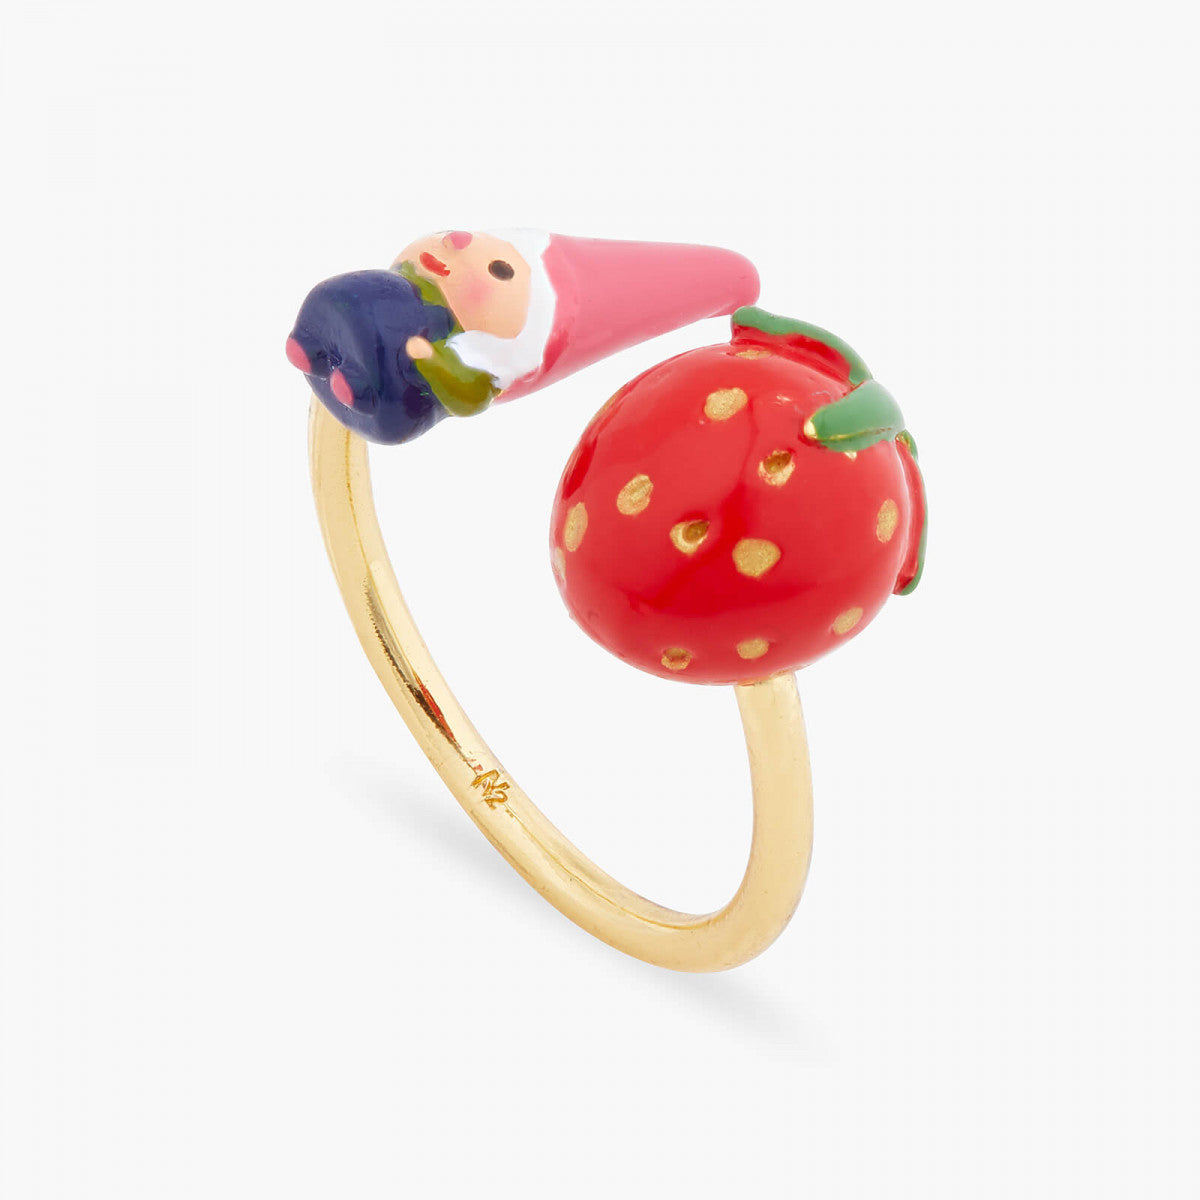 GARDEN GNOME AND STRAWBERRY YOU AND ME ADJUSTABLE RING